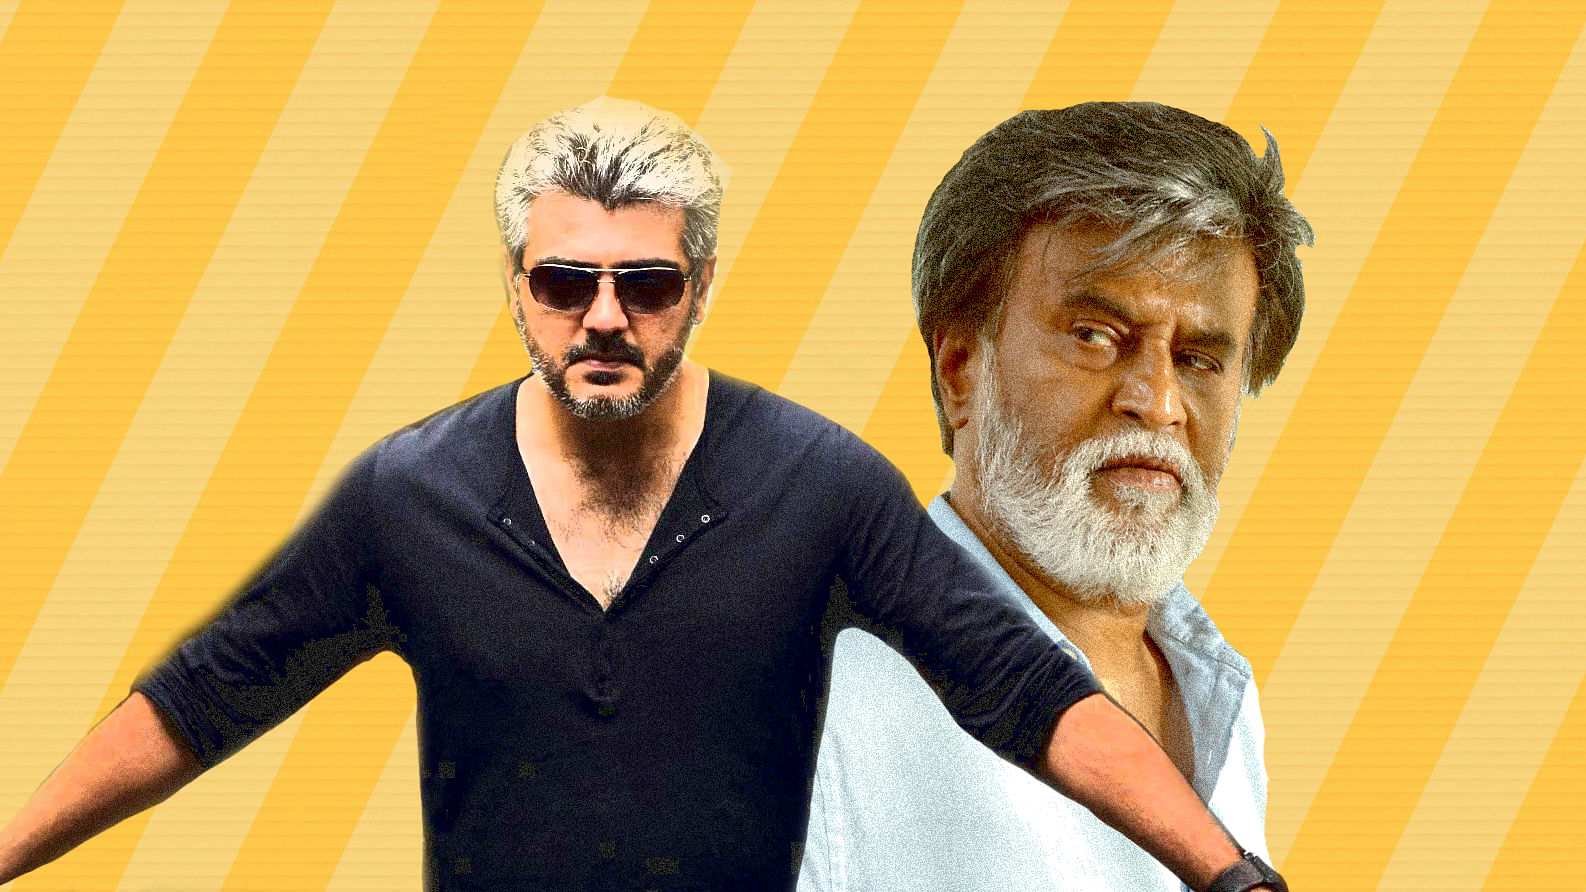 Will Ajith be anointed as the next king after Rajinikanth?